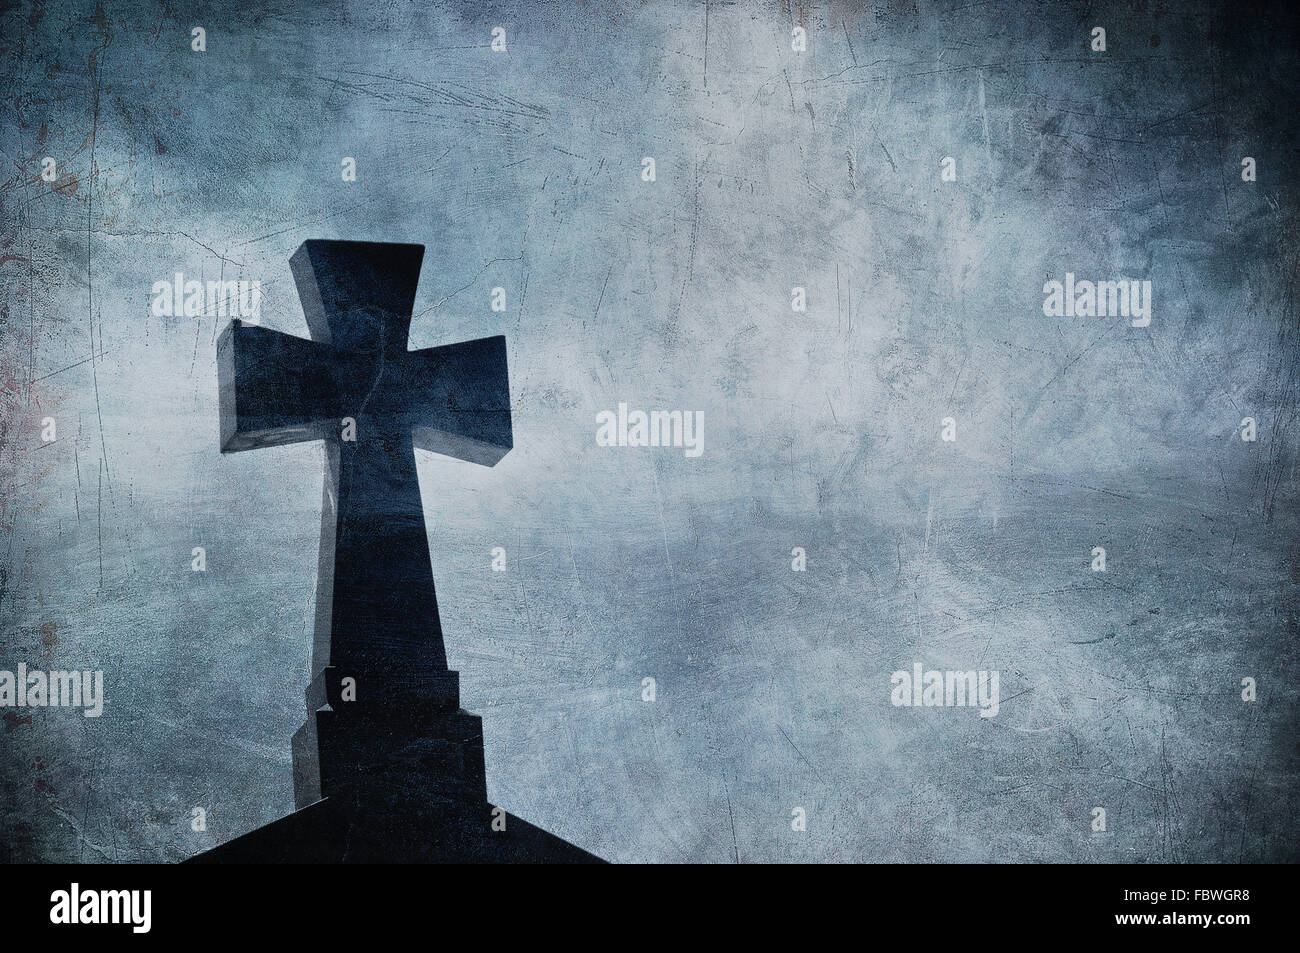 Grunge image of a cross in the cemetery, perfect halloween background Stock Photo